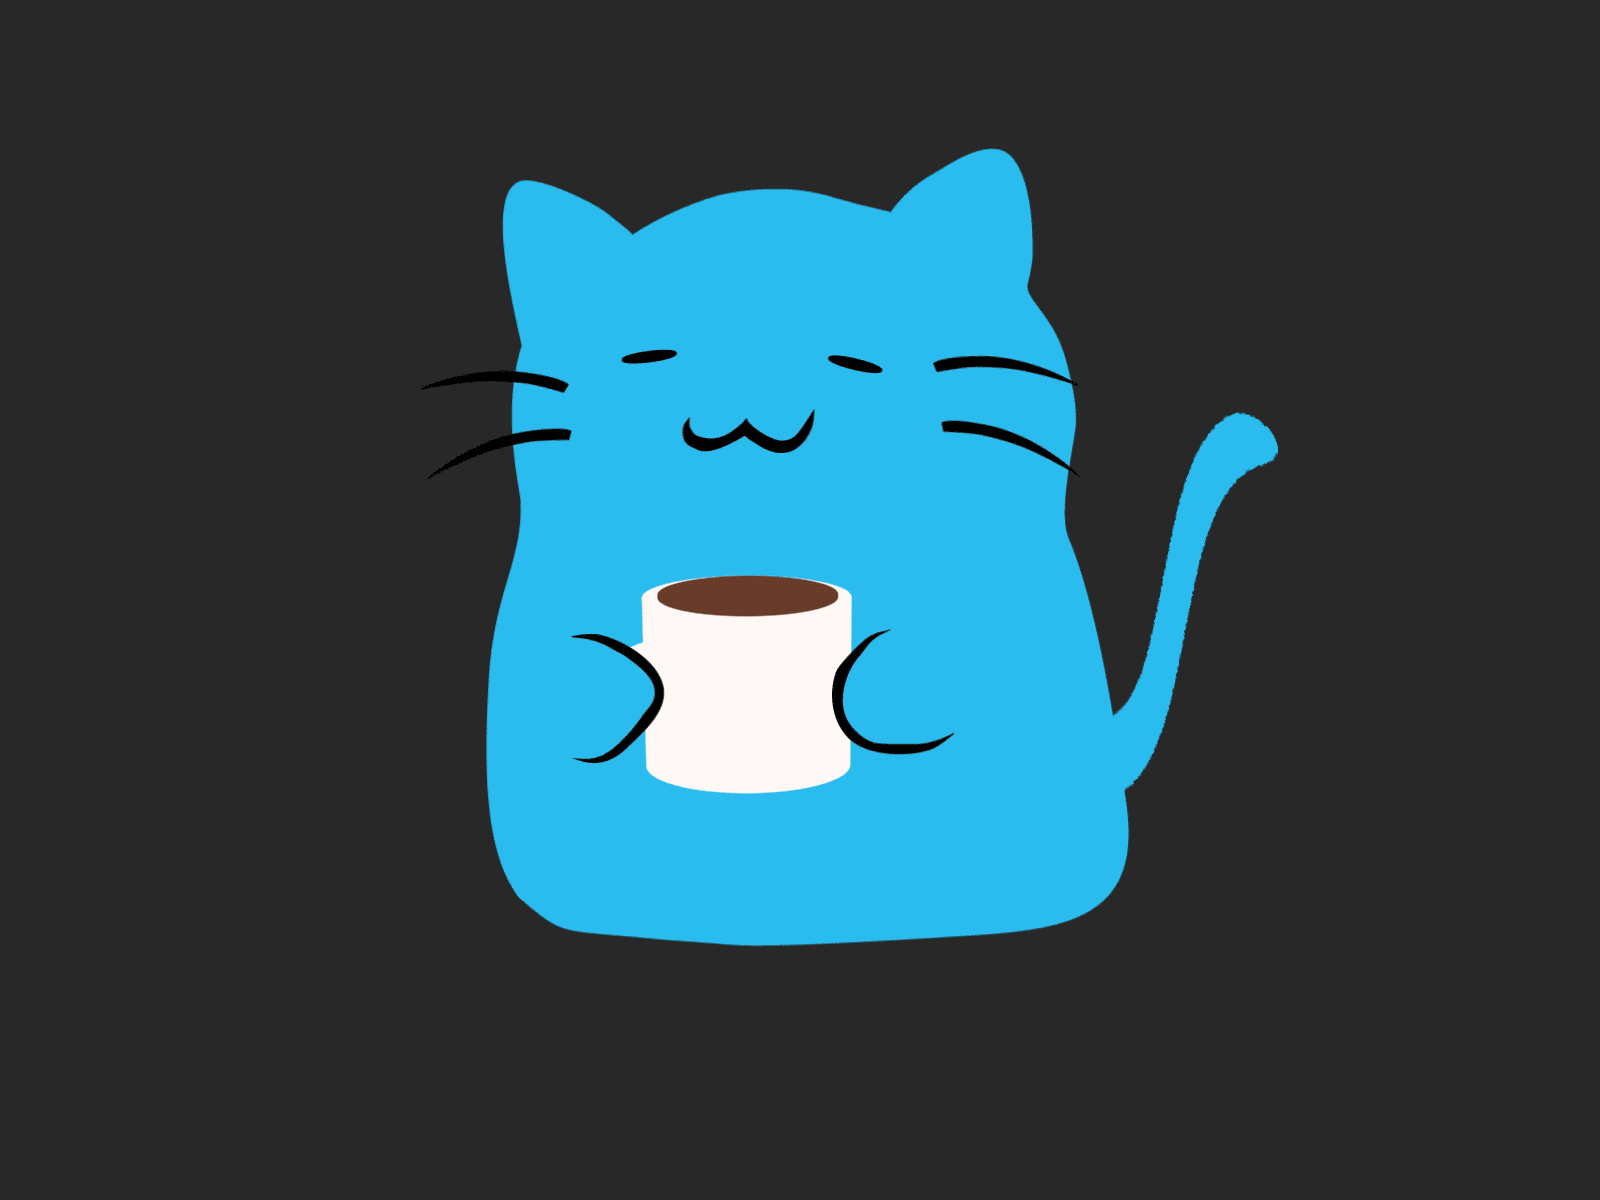 Loading Cat by flor3nc on Dribbble